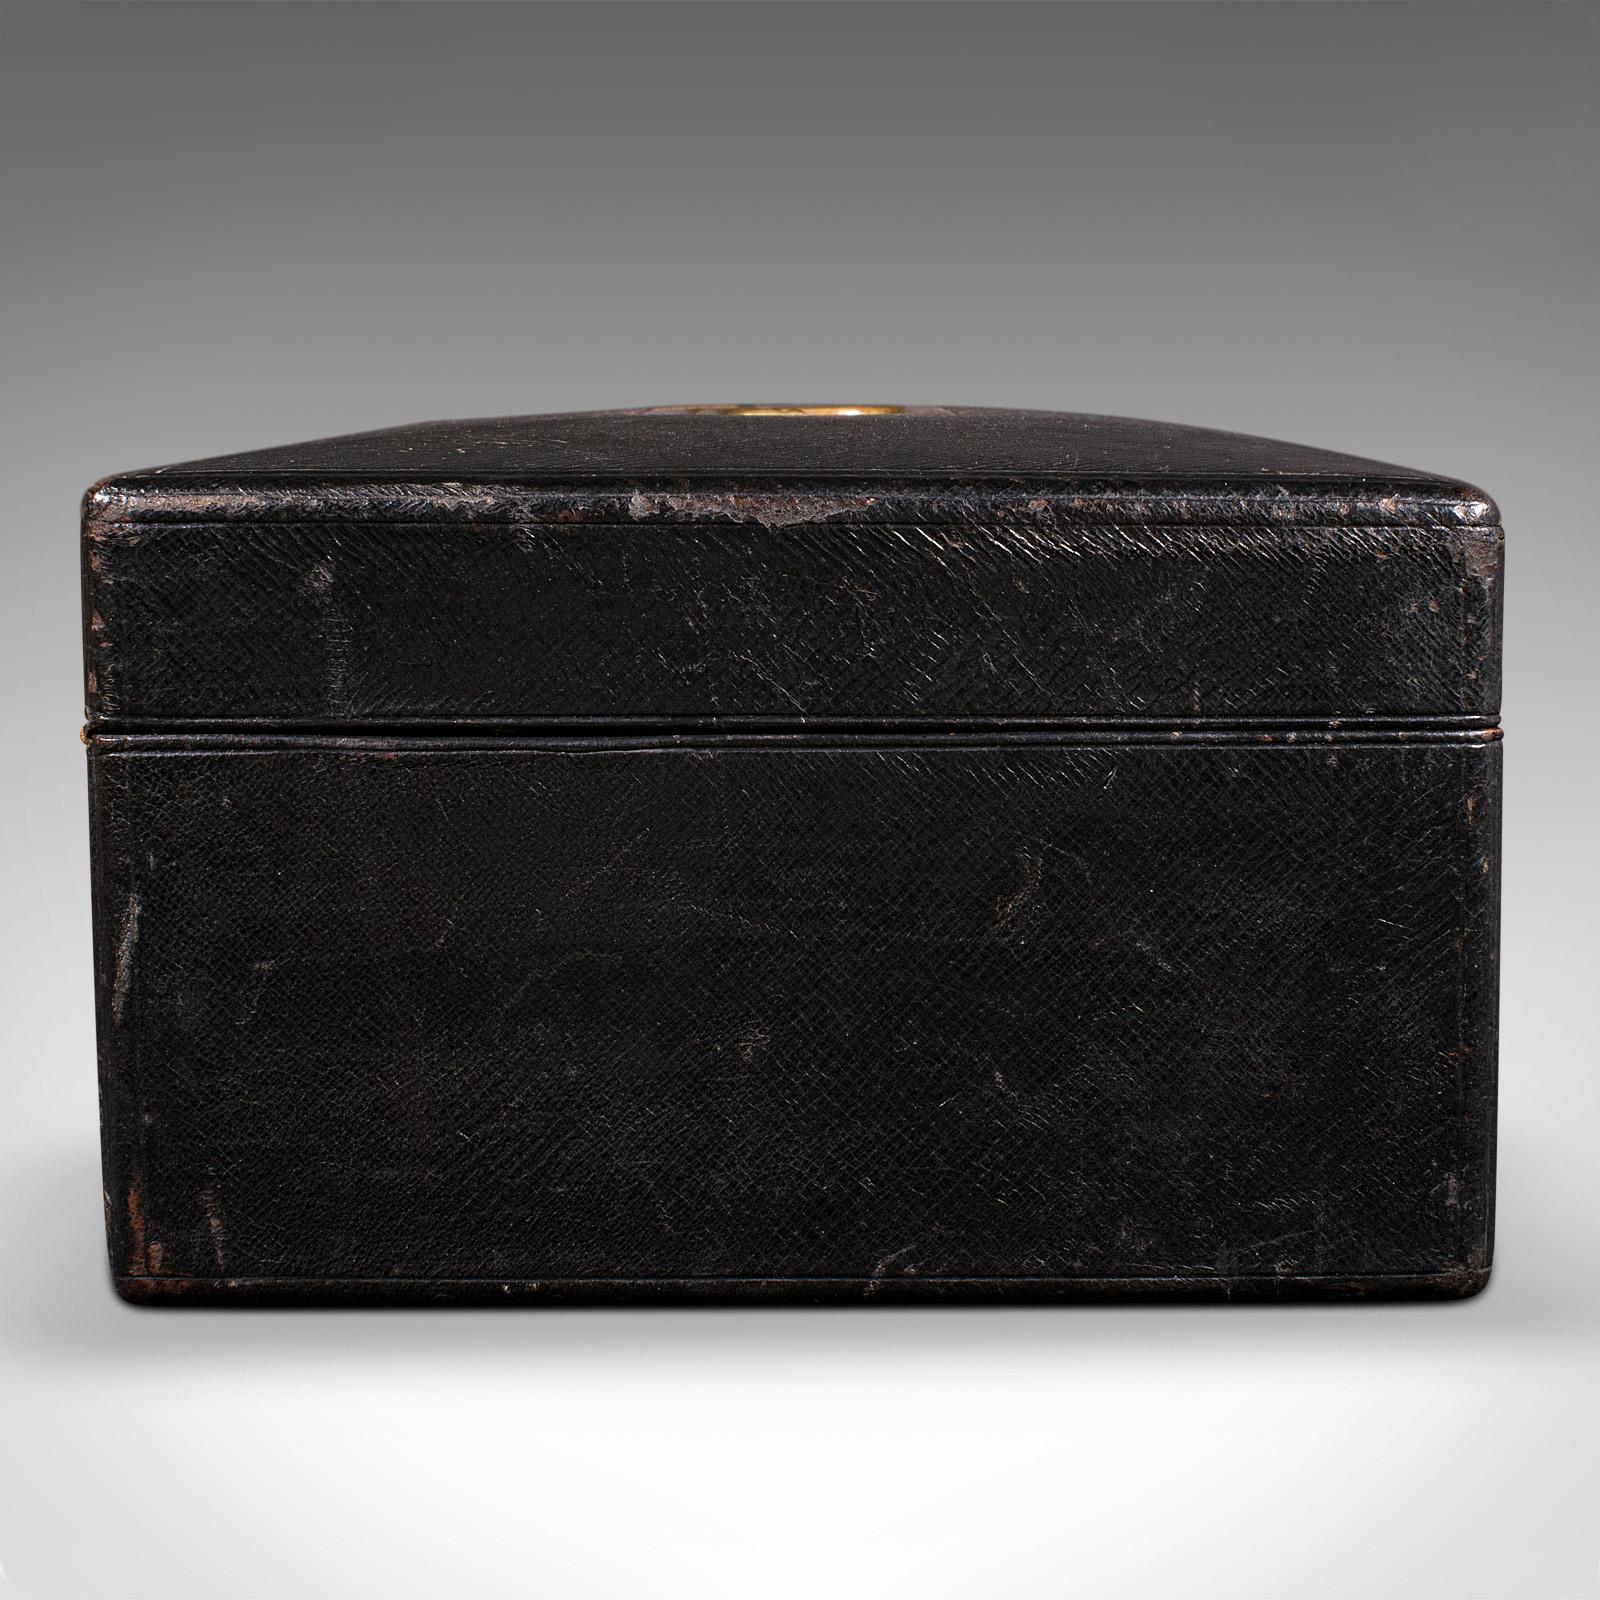 British Antique Correspondence Box, English, Leather, Writing Case, Victorian, C.1890 For Sale